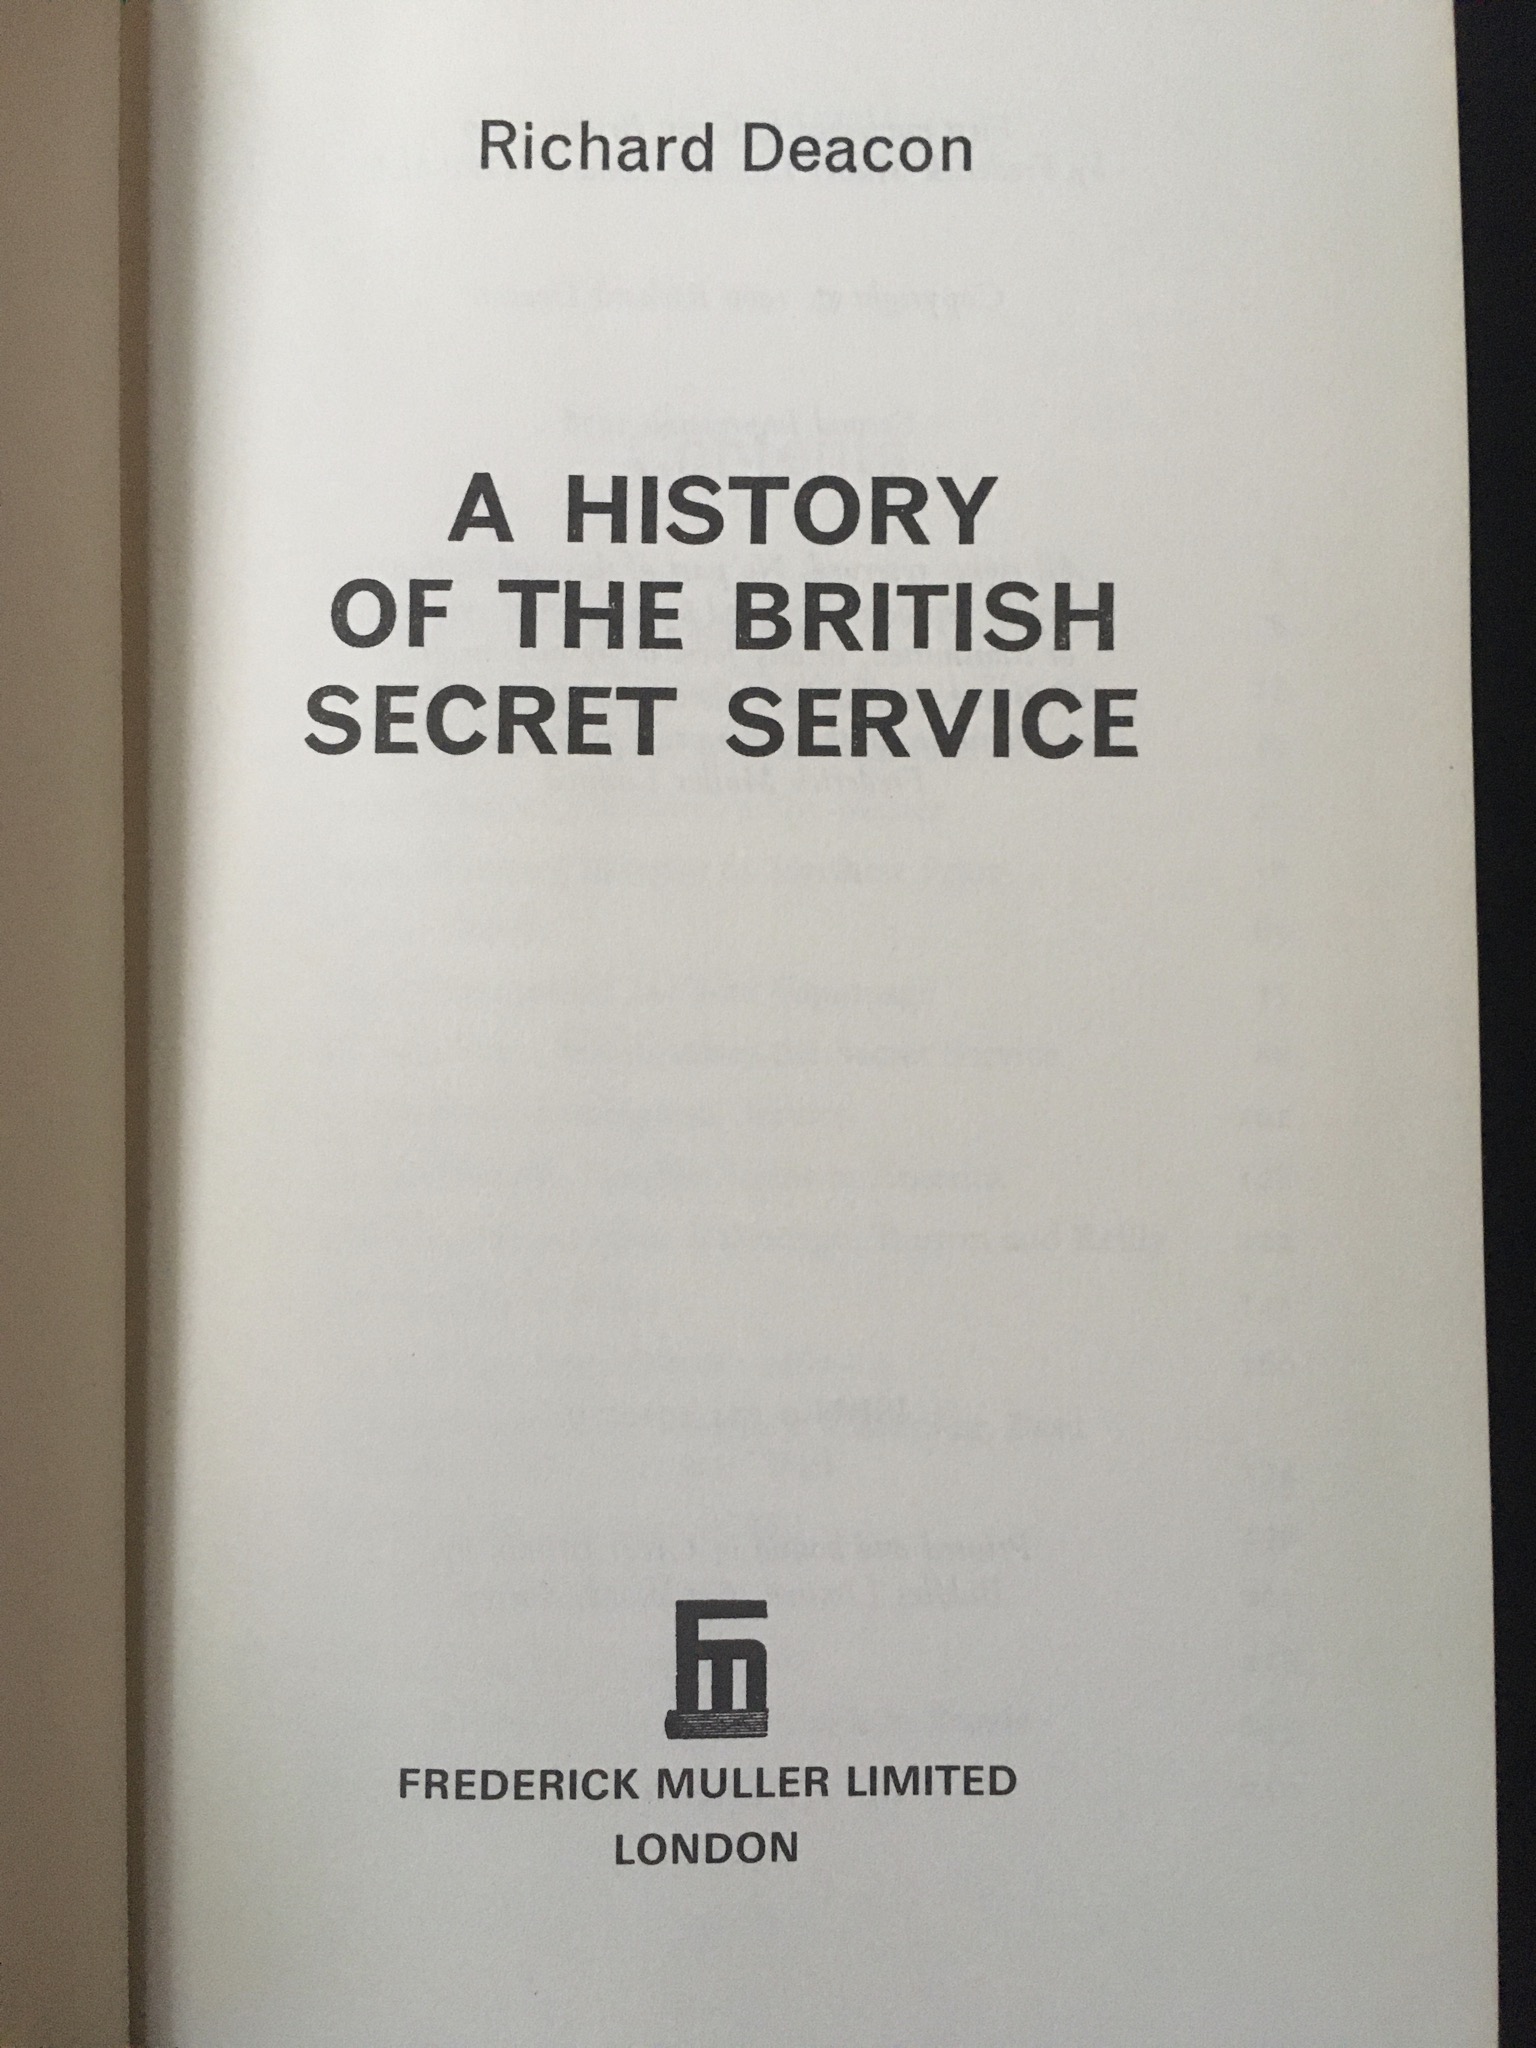 A History of The British Secret Service by Richard Deacon